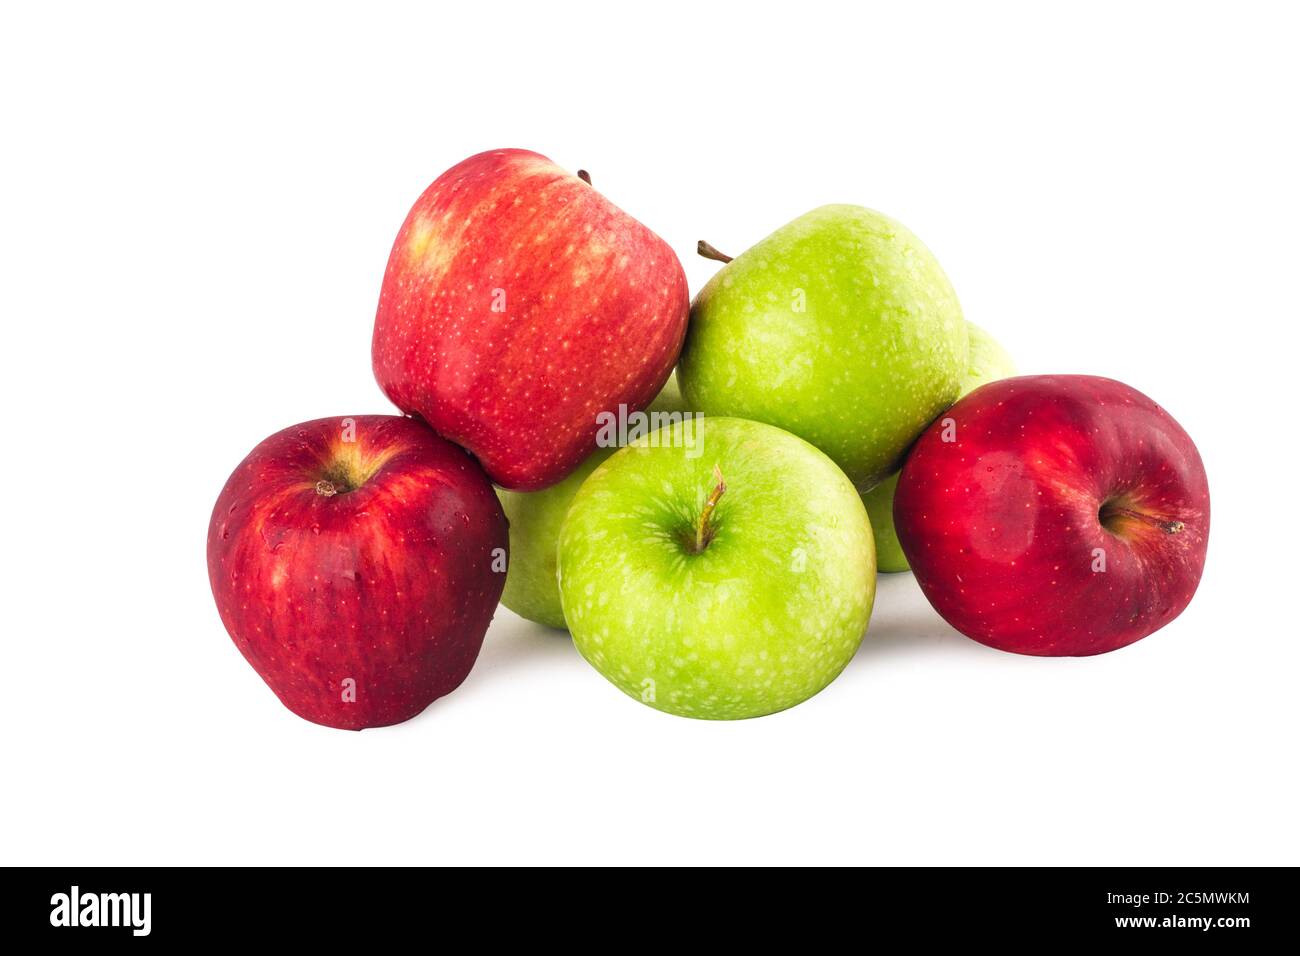 green apple and red apple ( malus domestica ) on white background fruit agriculture food isolated Stock Photo